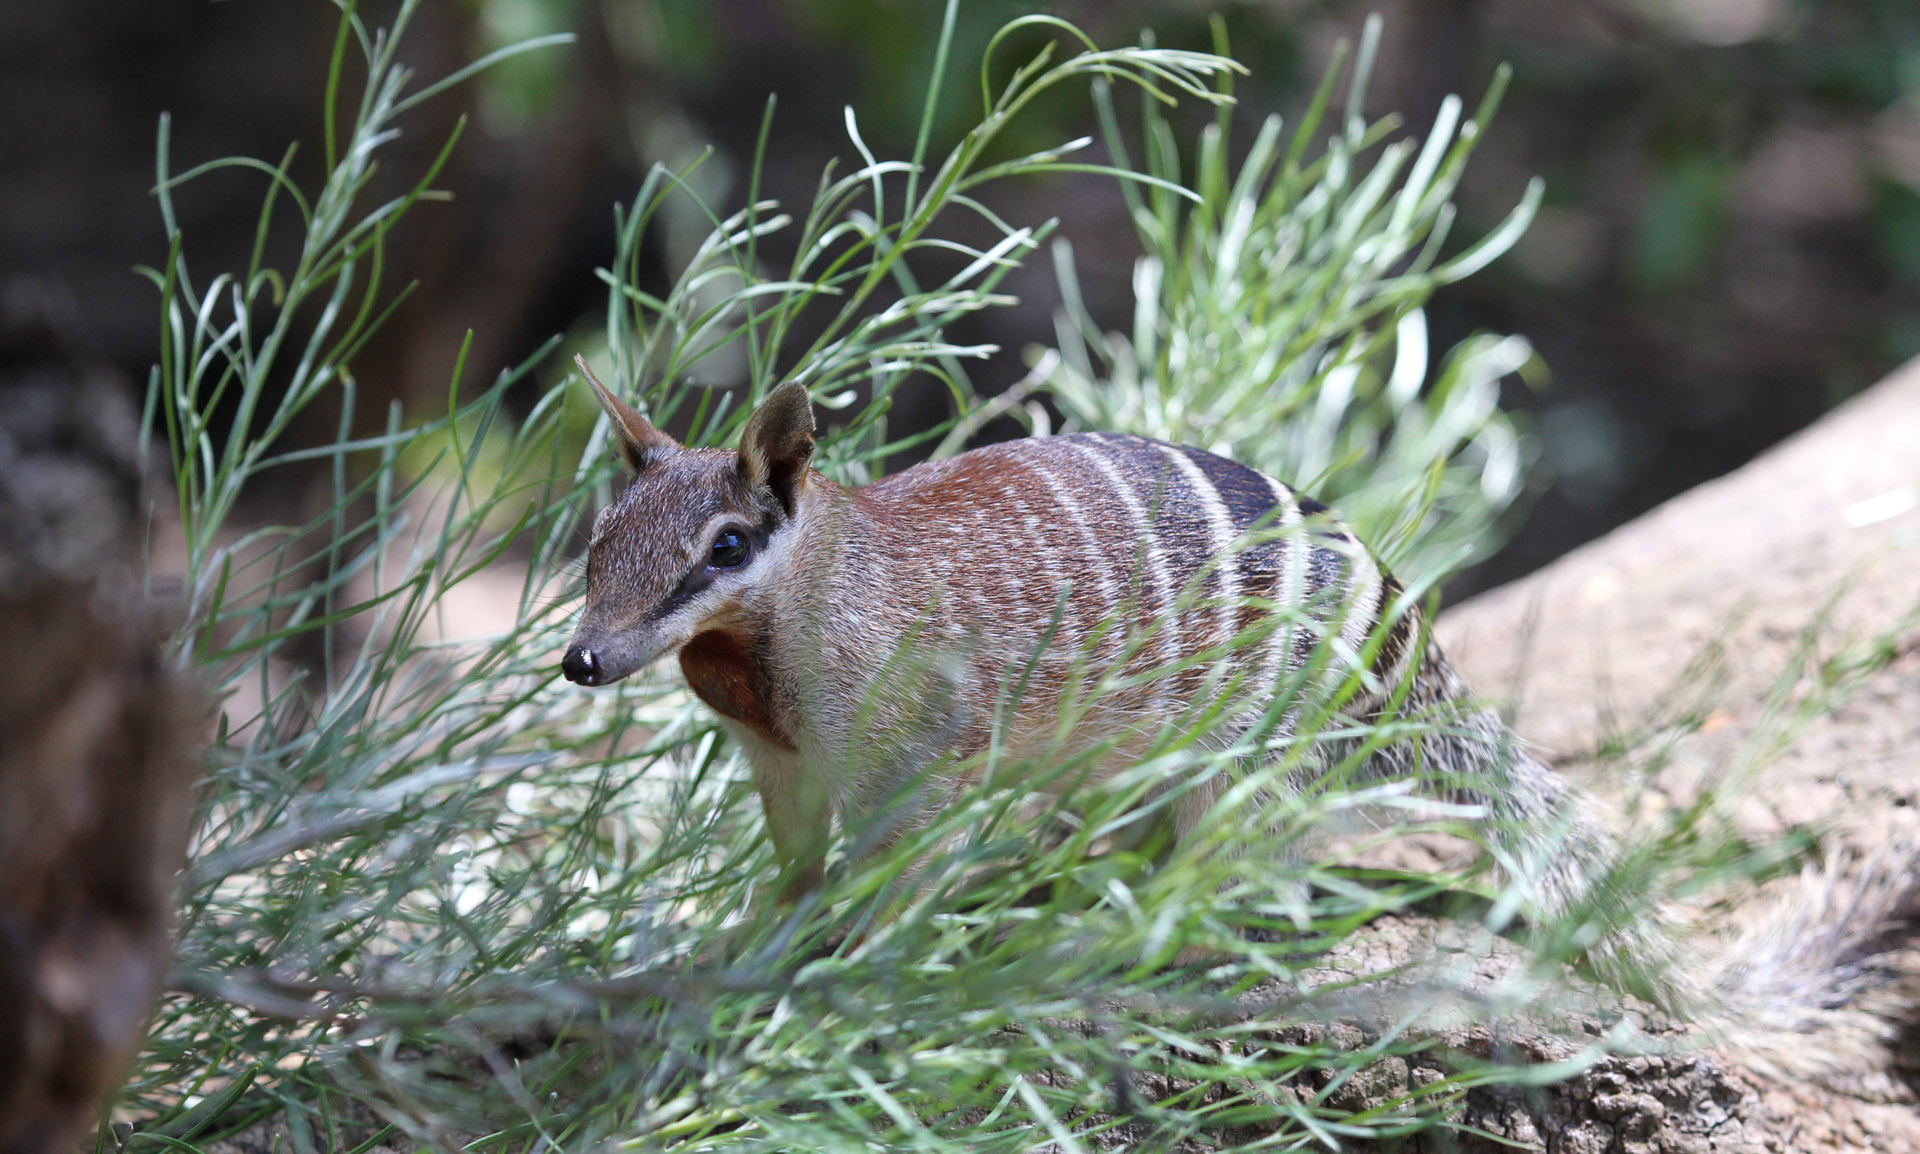 Download numbat image for free